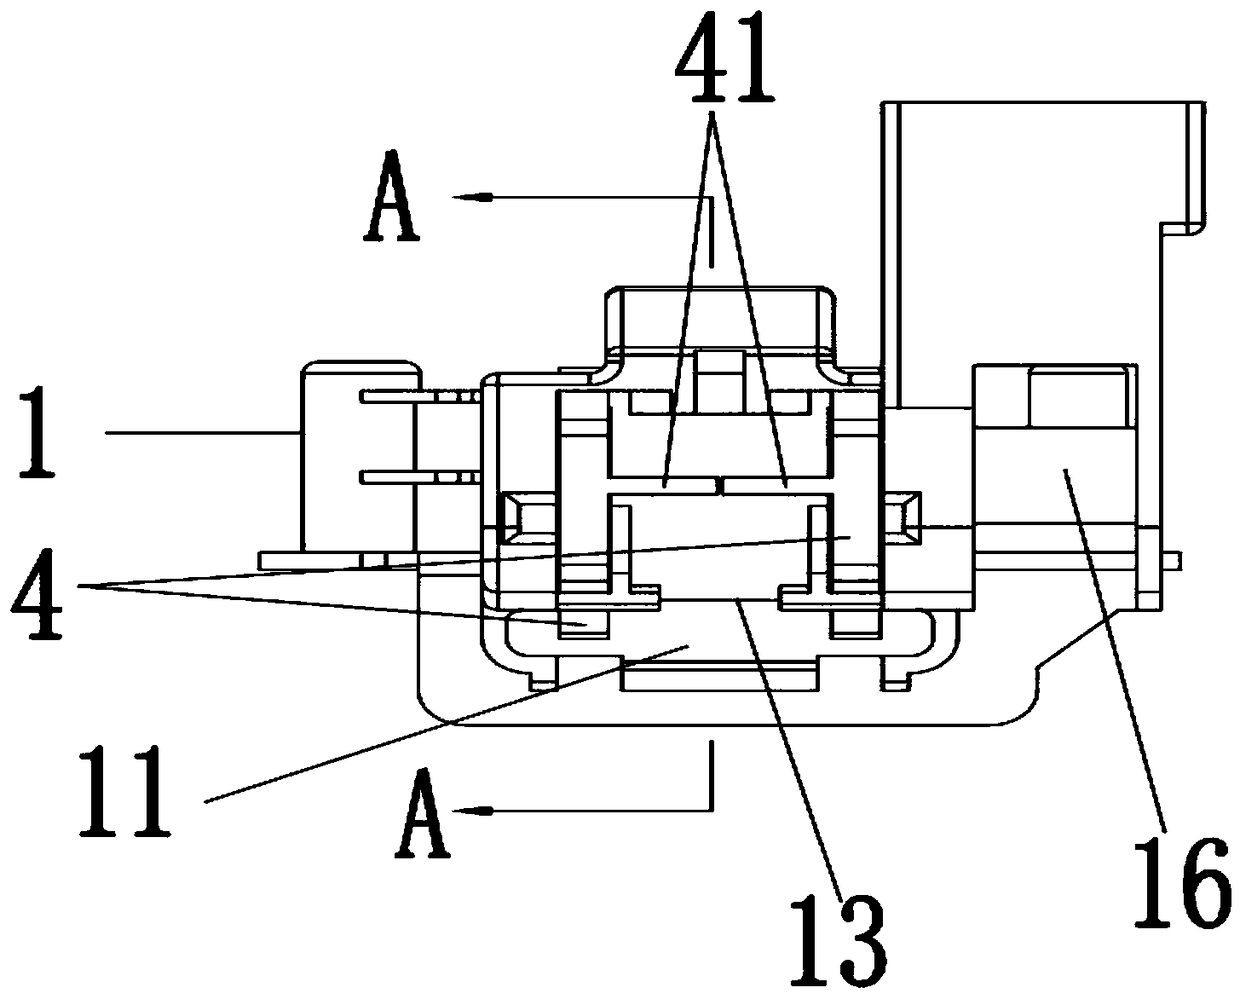 Door lock structure and electrical appliance equipment